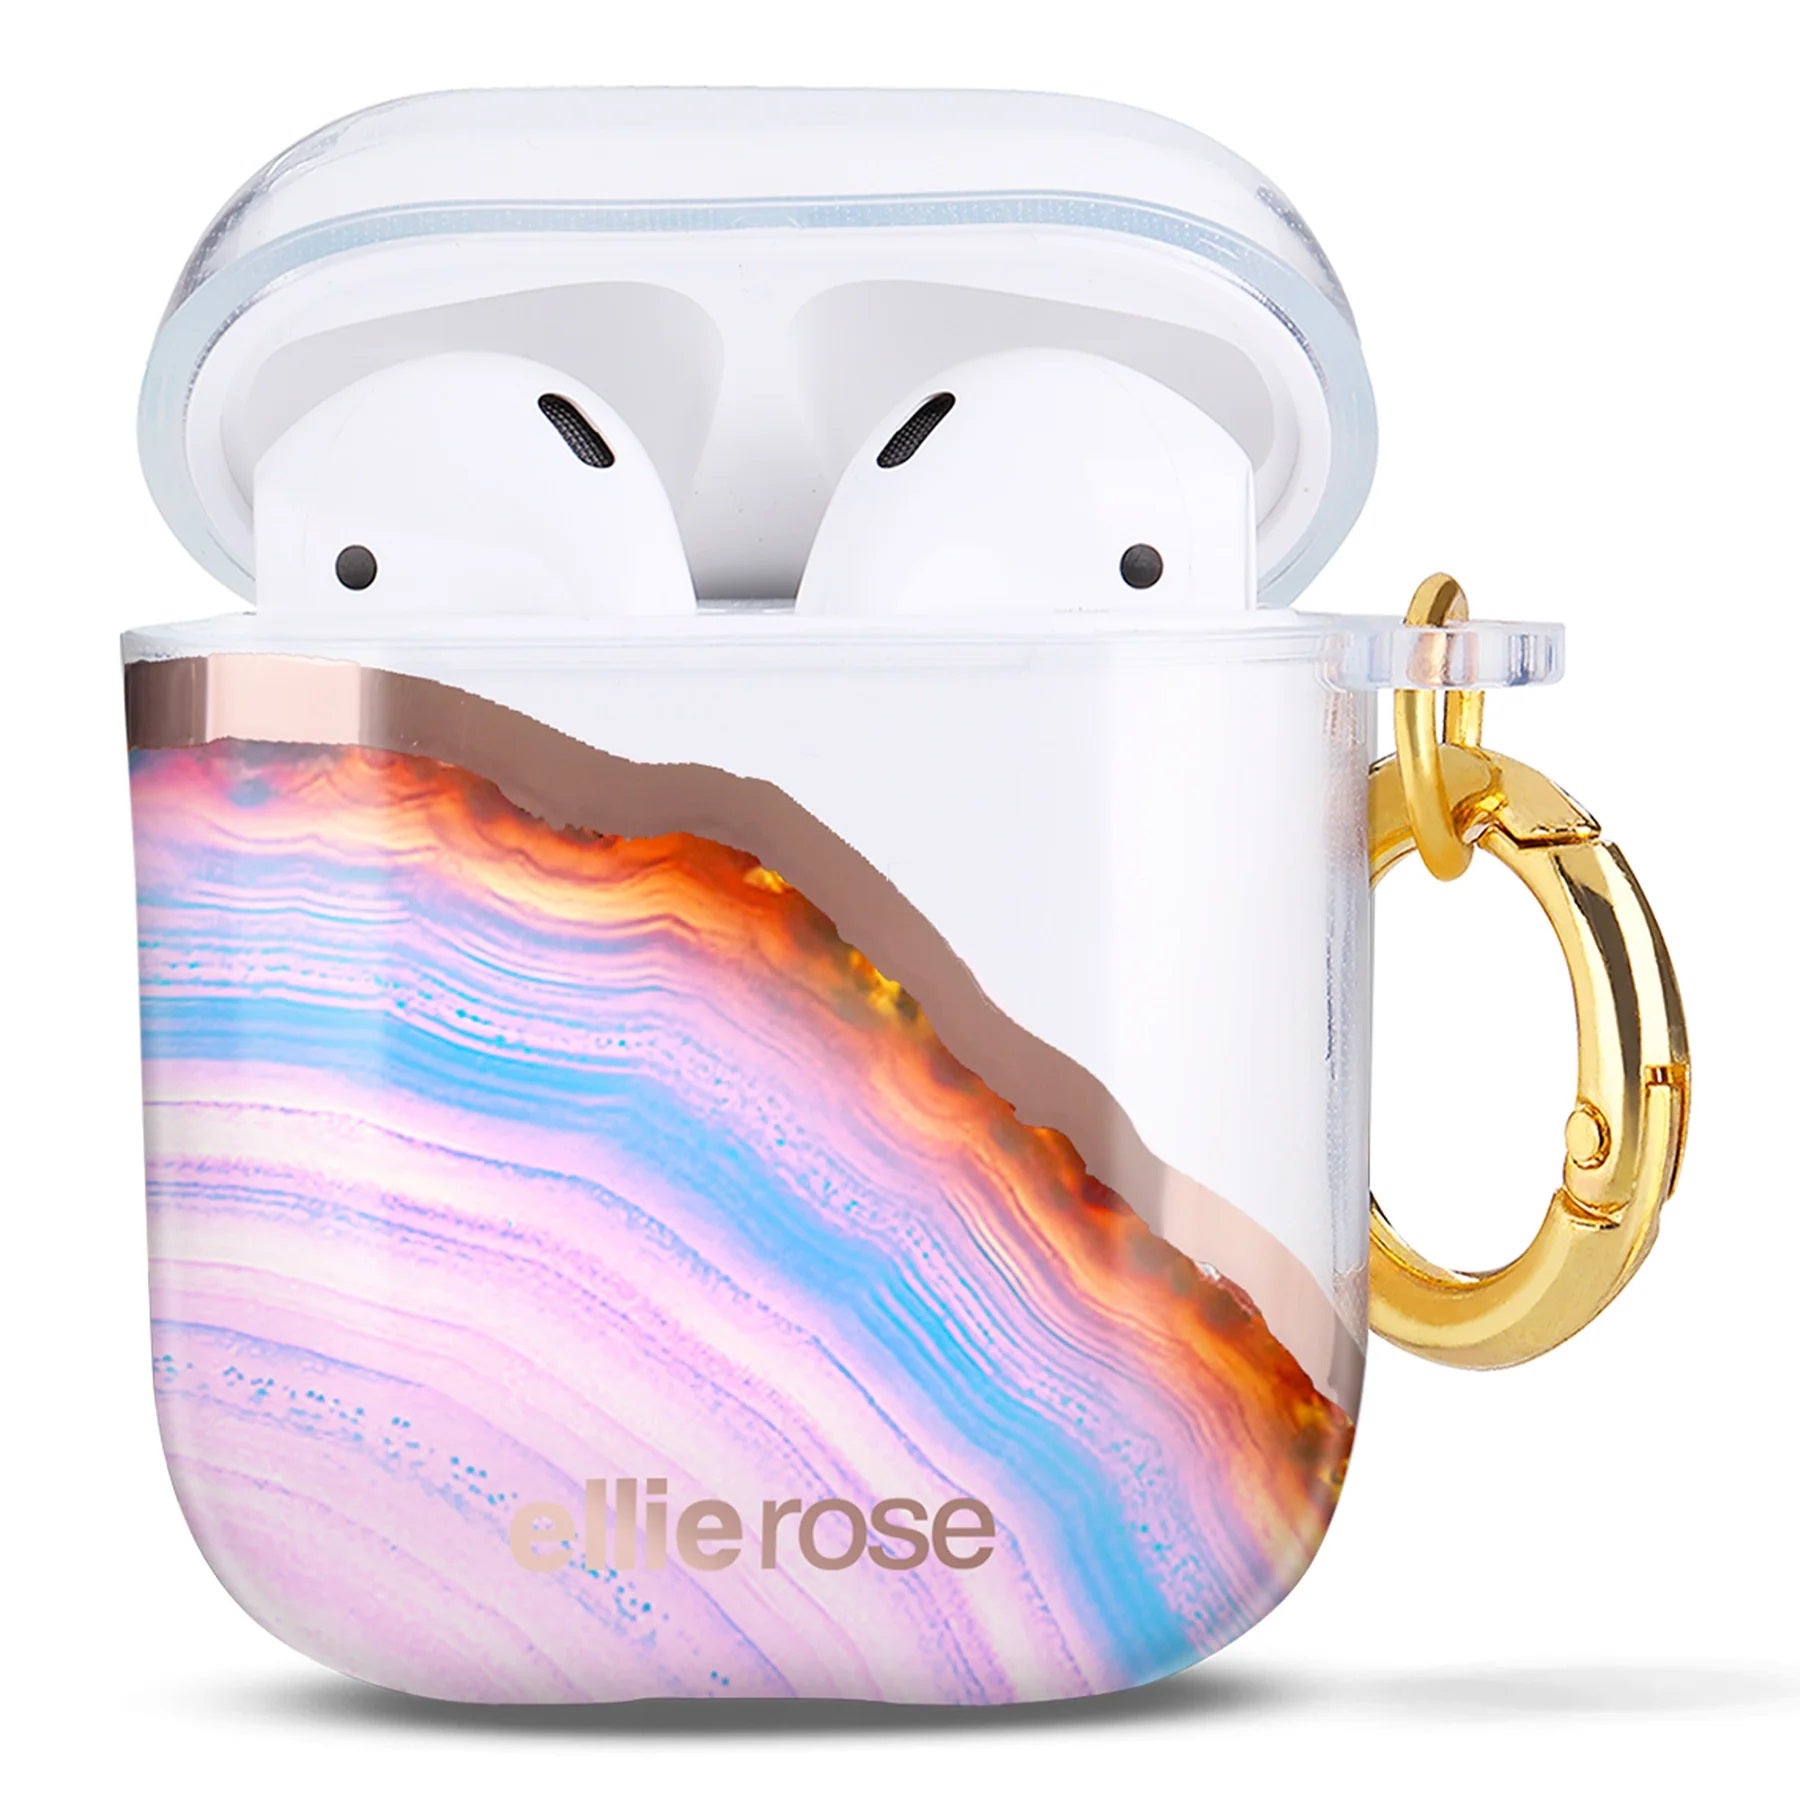 A must-have for on-the-go convenience, our Protective Airpods Cases are made of high quality, yet flexible TPU to provide superior protection for your AirPods. With a secure 2-piece case and a gold ring that attaches to your purse, keys, or gym bag, you'll be ready for anything. Plus, you get easy access to the lightning port and compatibility with most wireless chargers. Protect your AirPods in style!